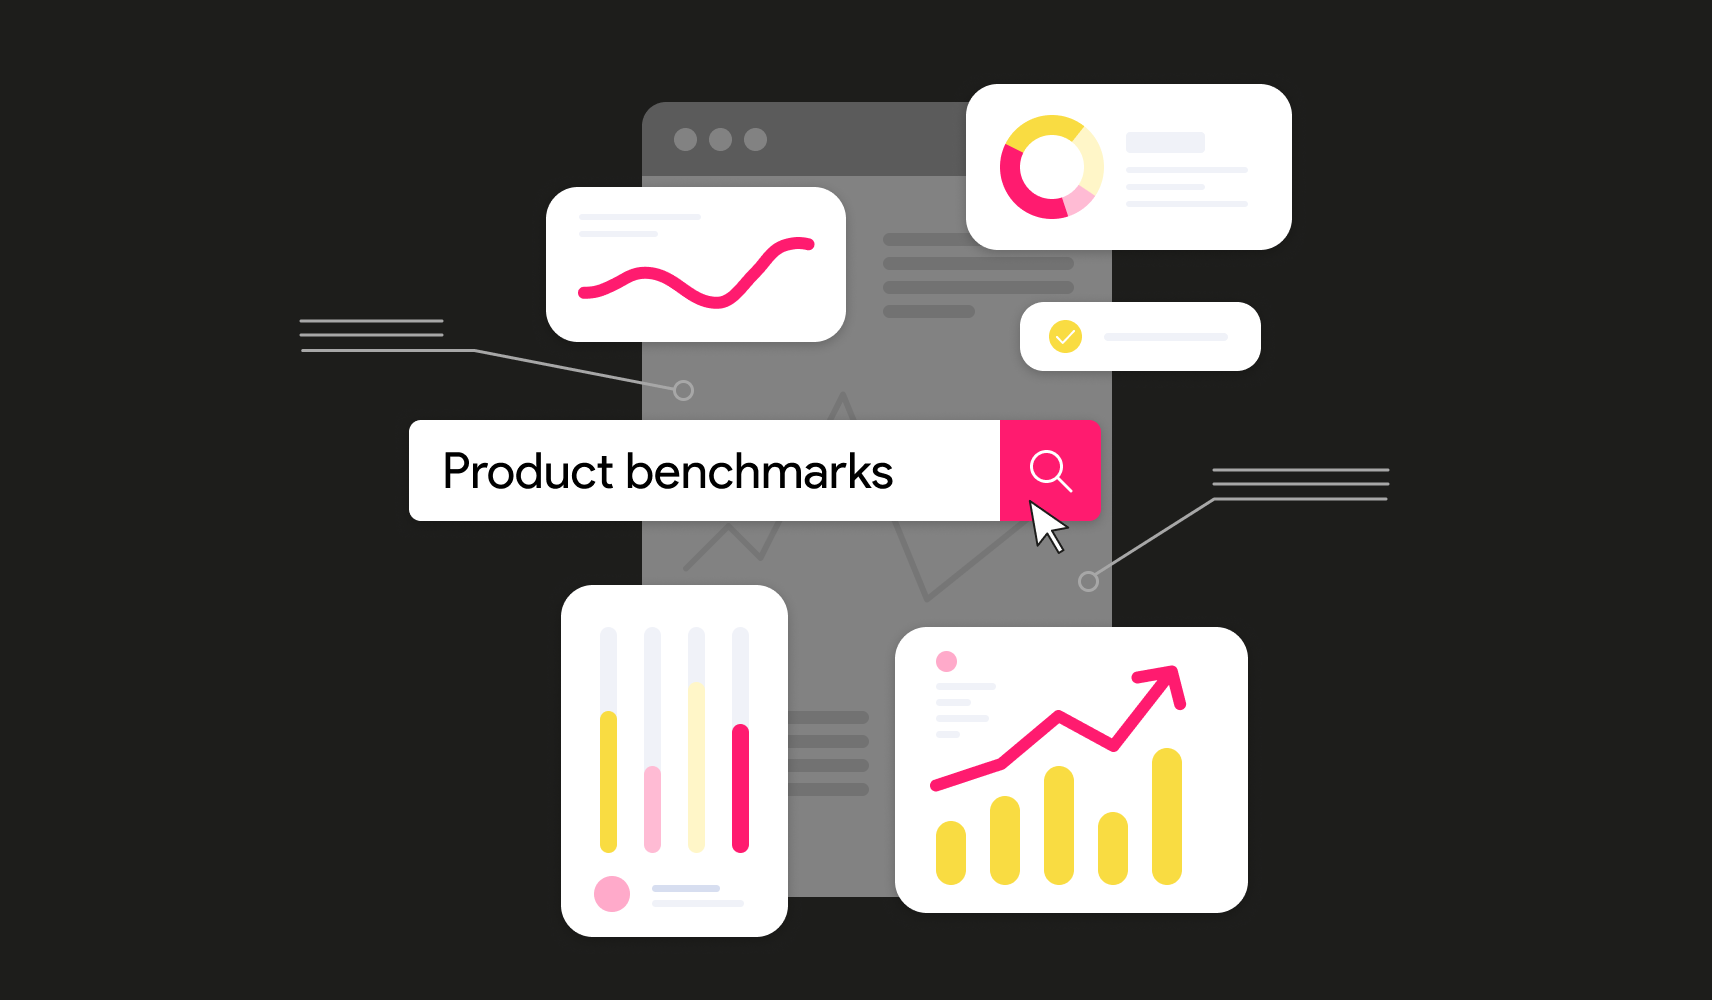 What Do Your Product Growth Metrics Tell You? Benchmarks Across Industries - Qubstudio